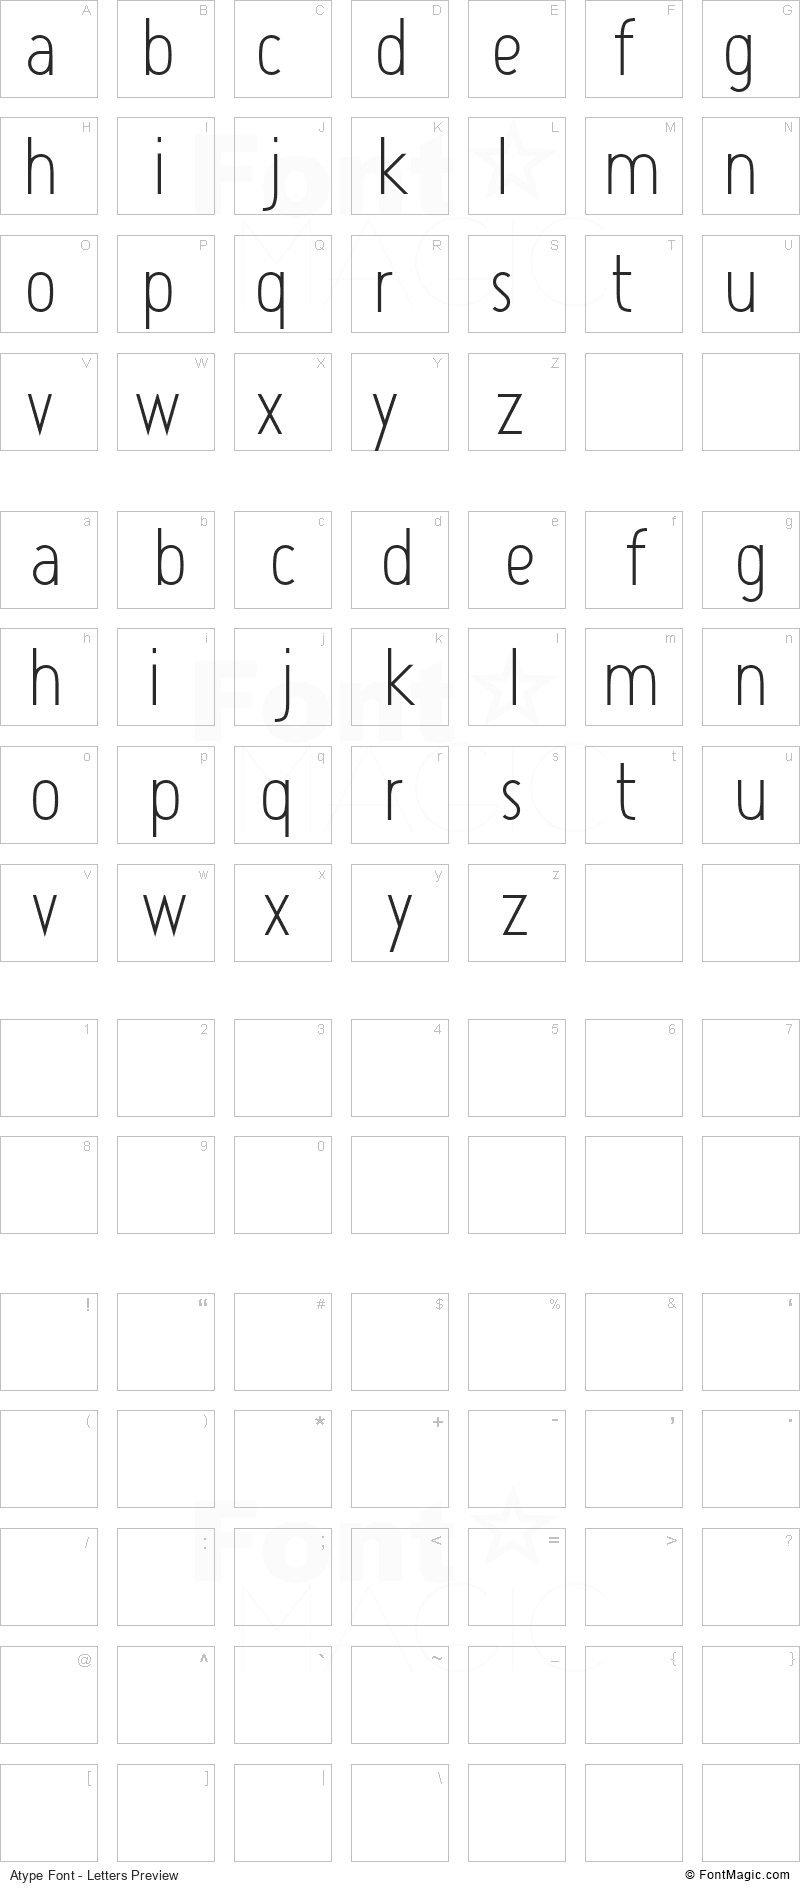 Atype Font - All Latters Preview Chart